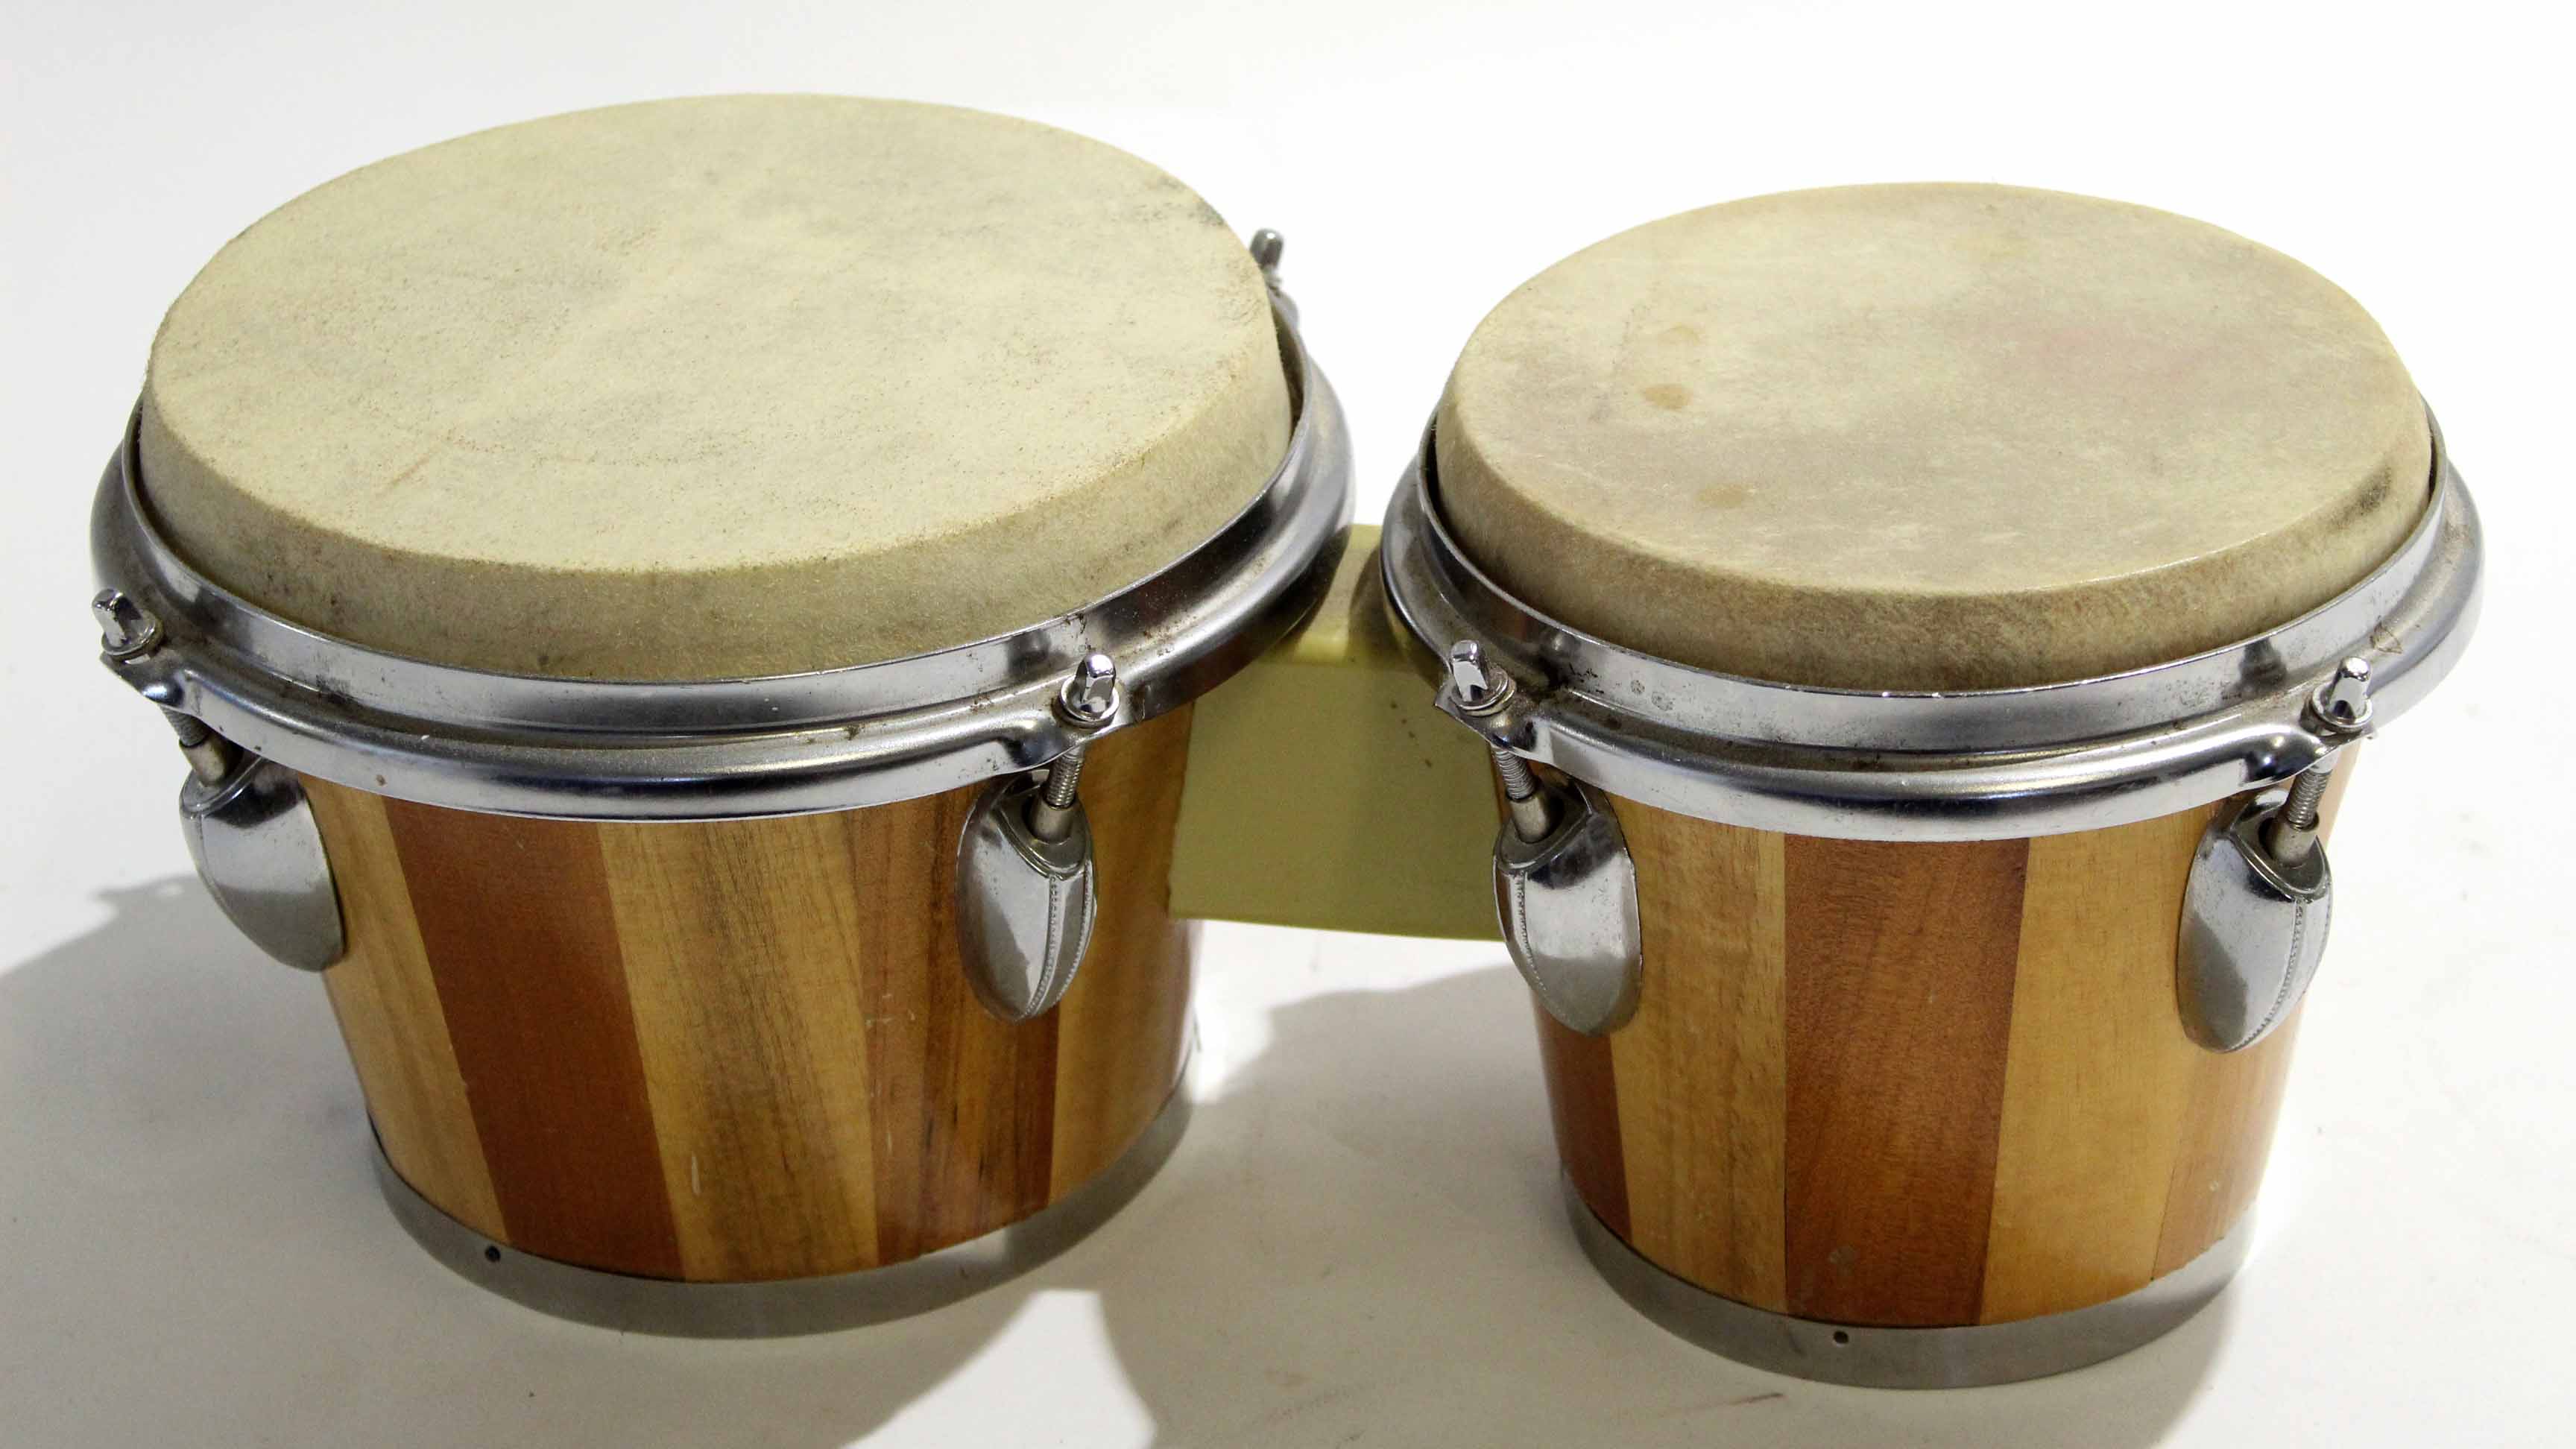 Pair of small drums in wooden case